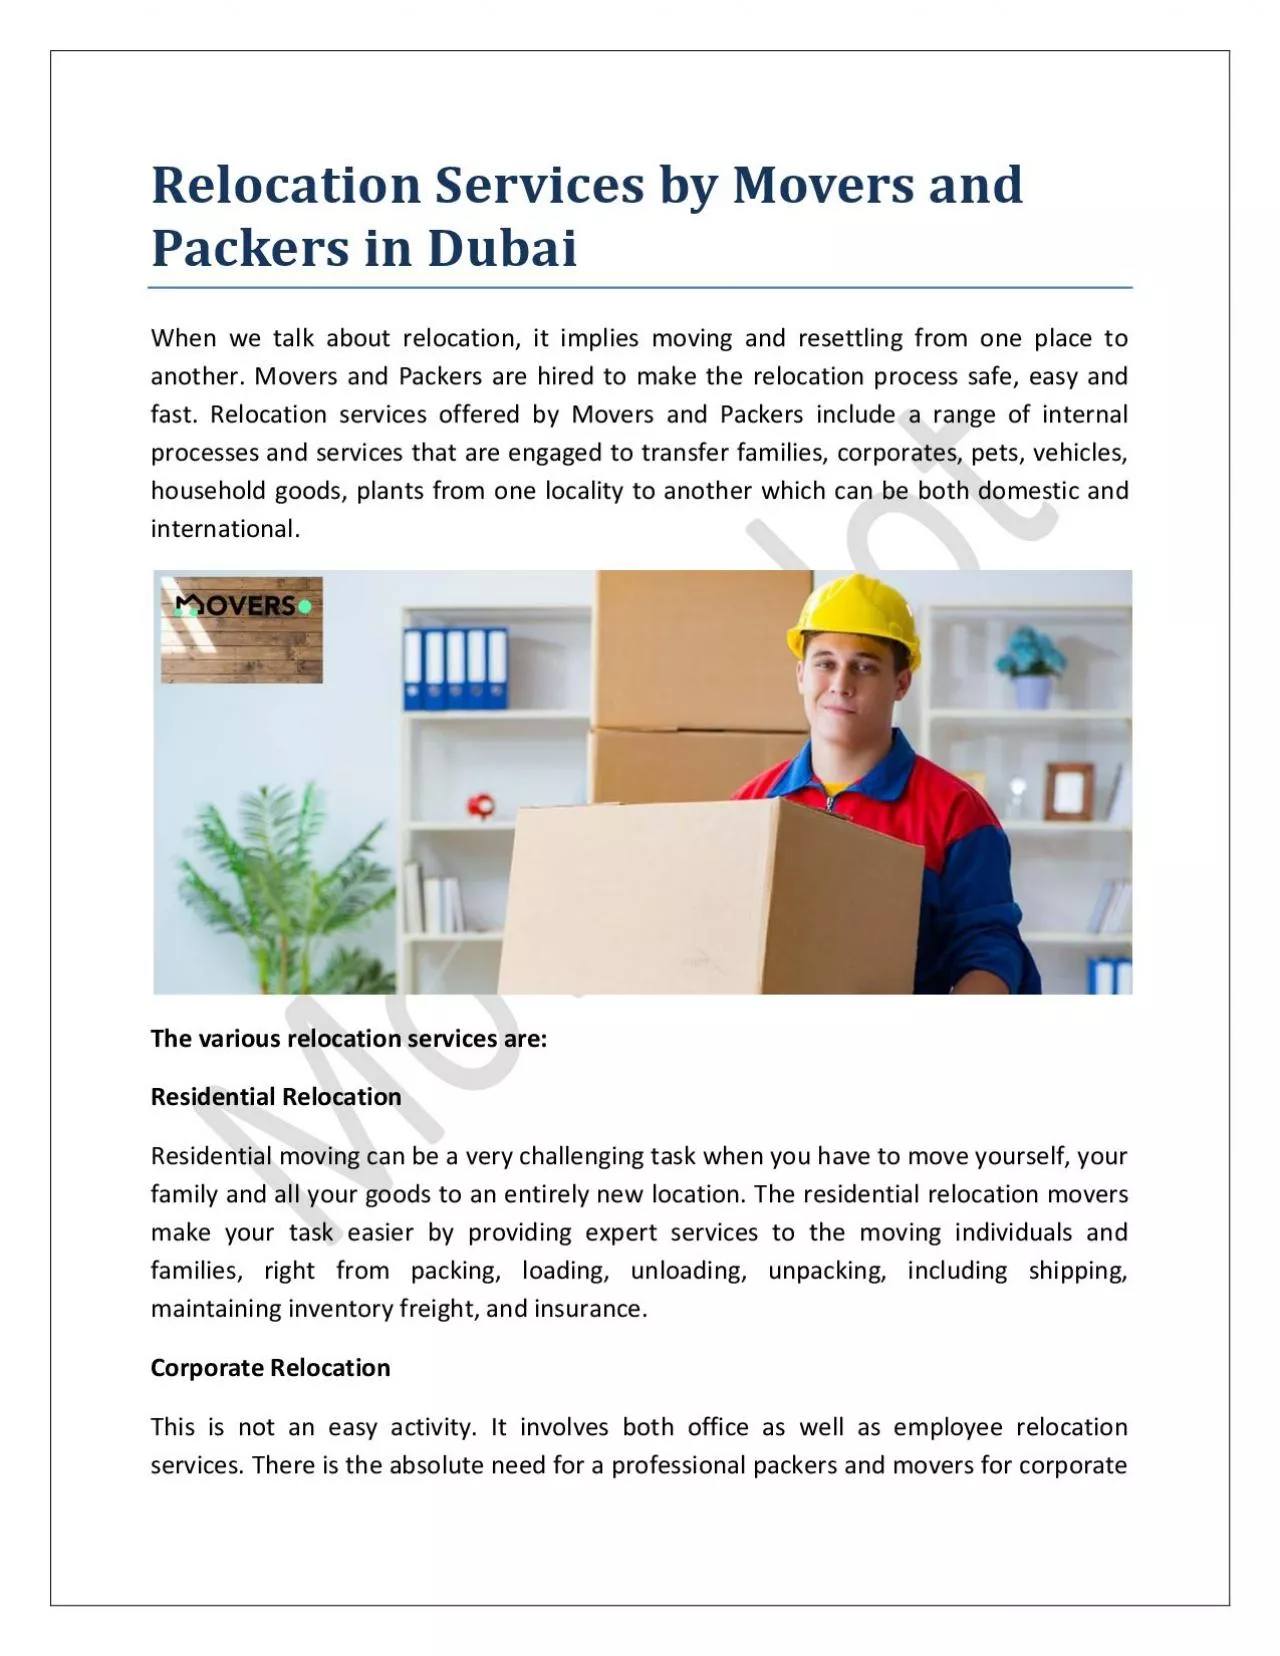 Relocation Services by Movers and Packers in Dubai